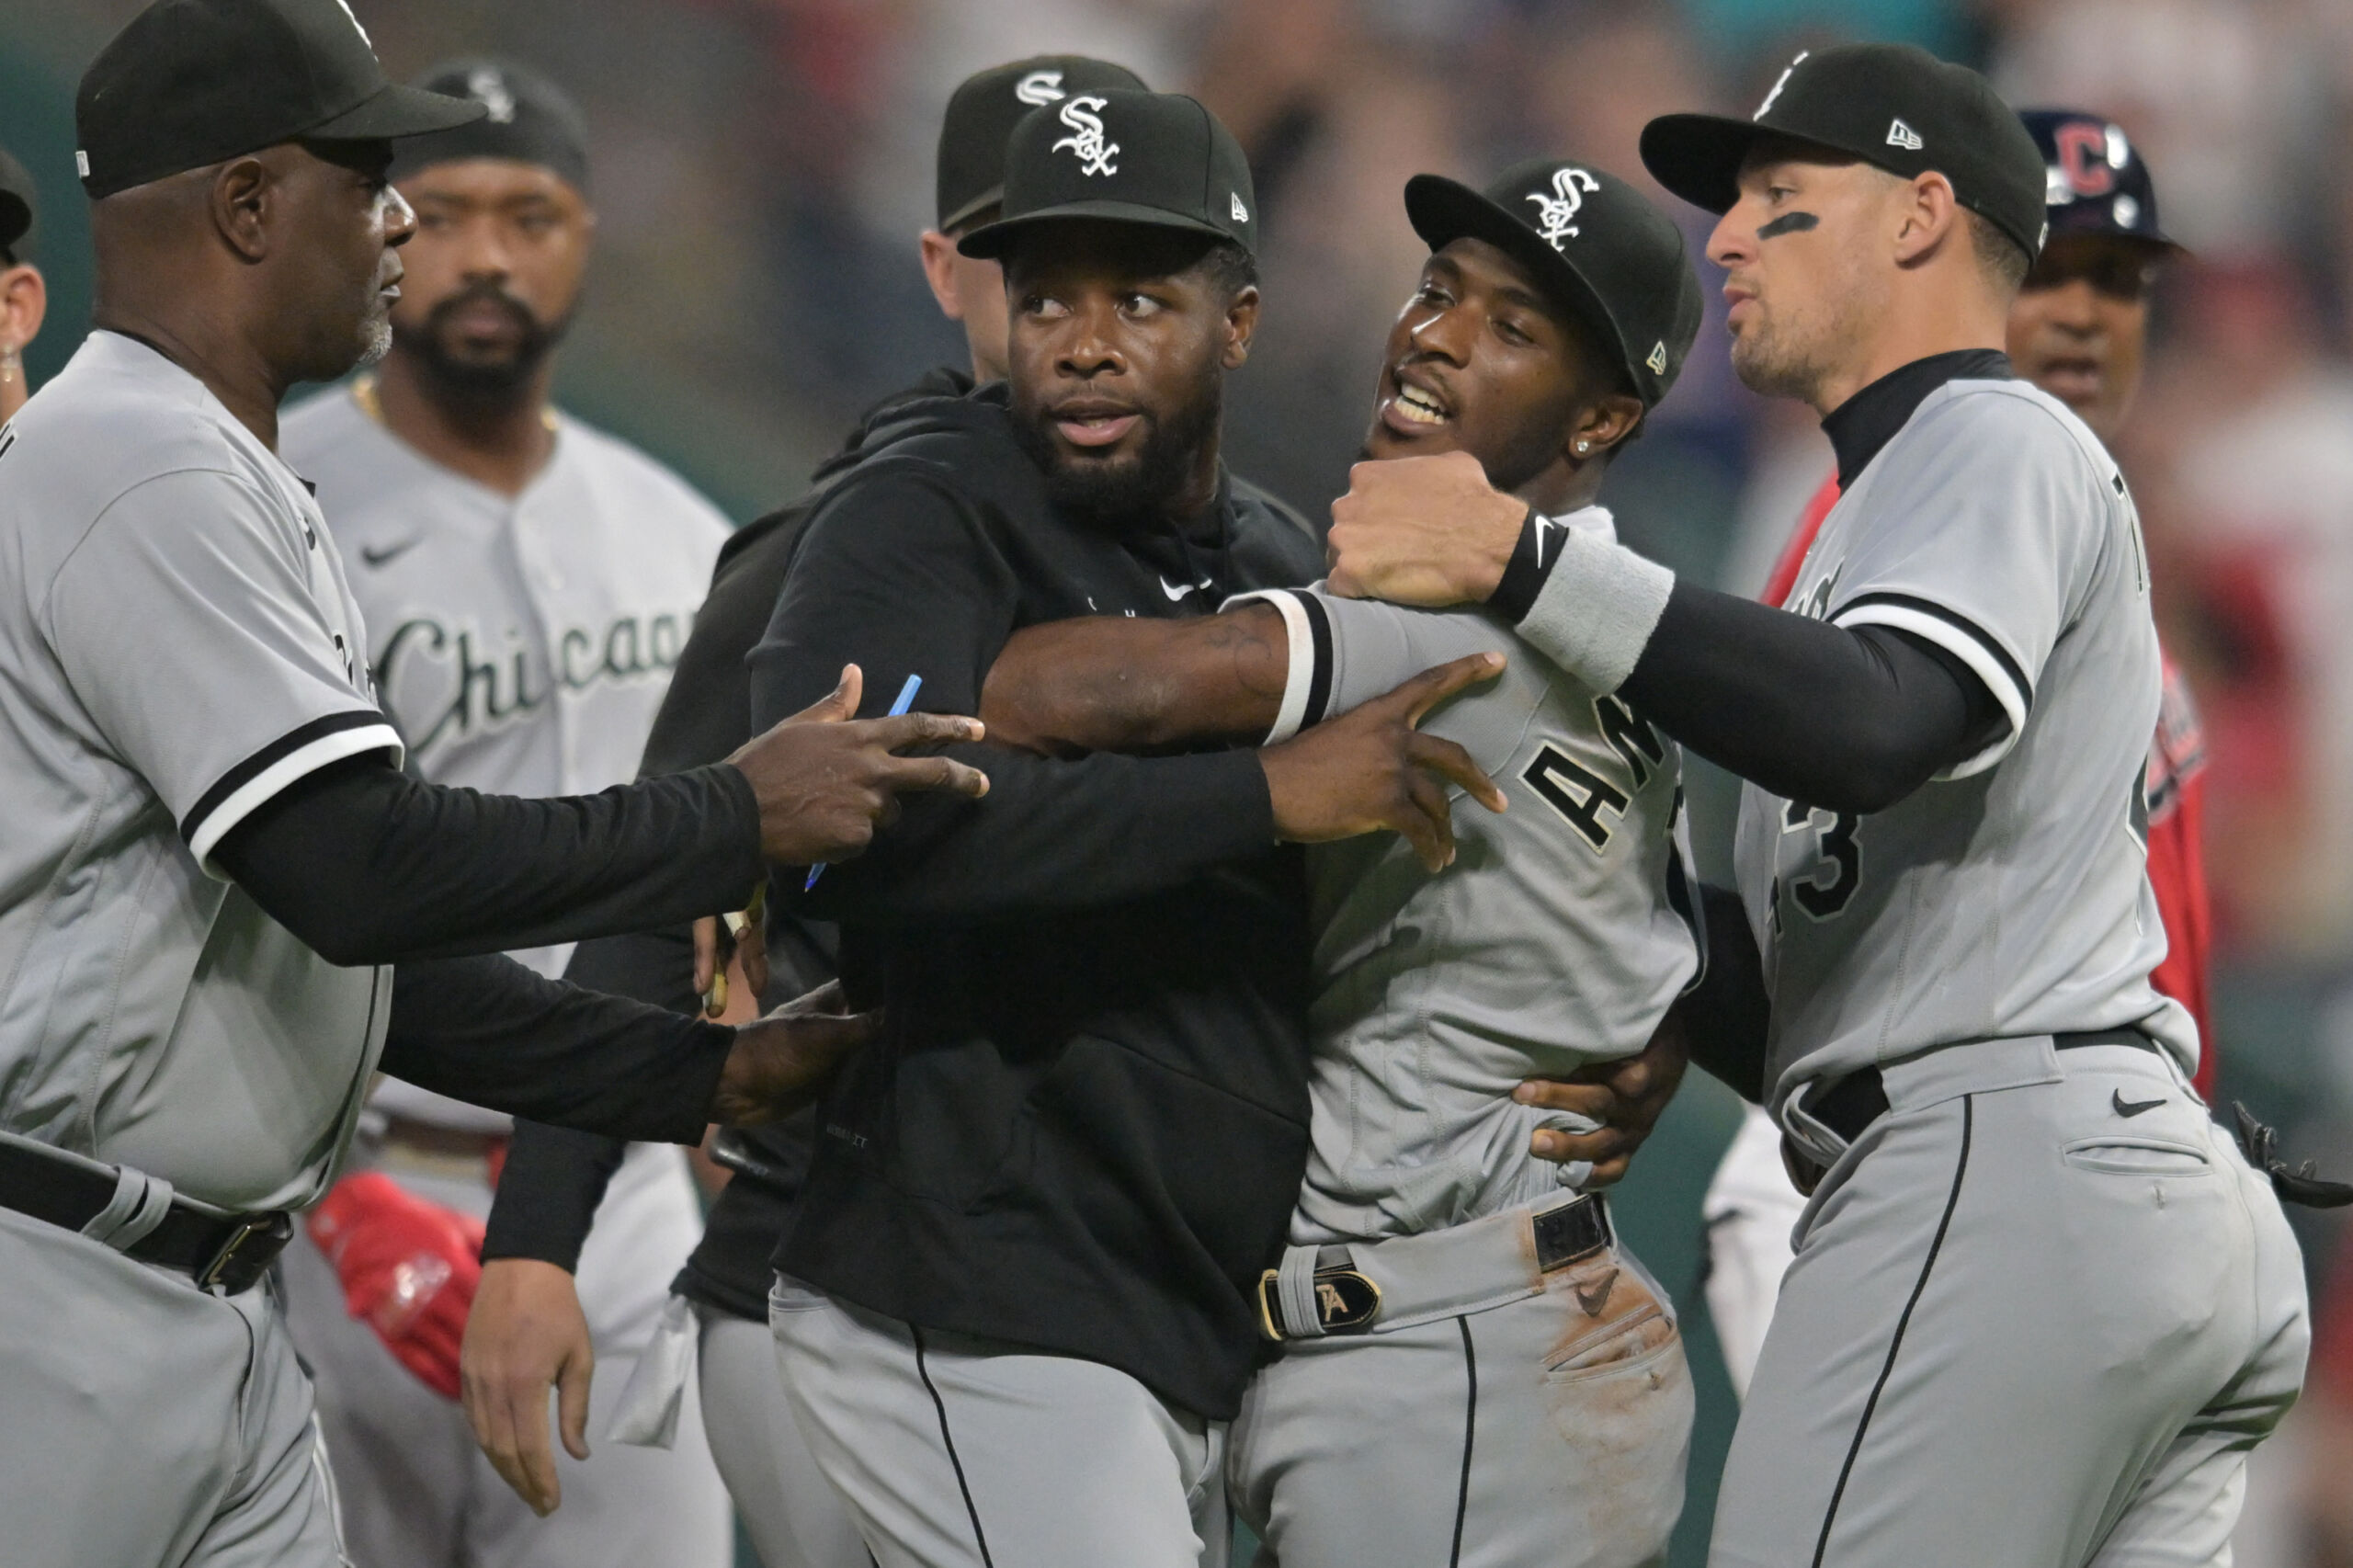 Bench-clearing fight during White Sox-Guardians game leads to MLB